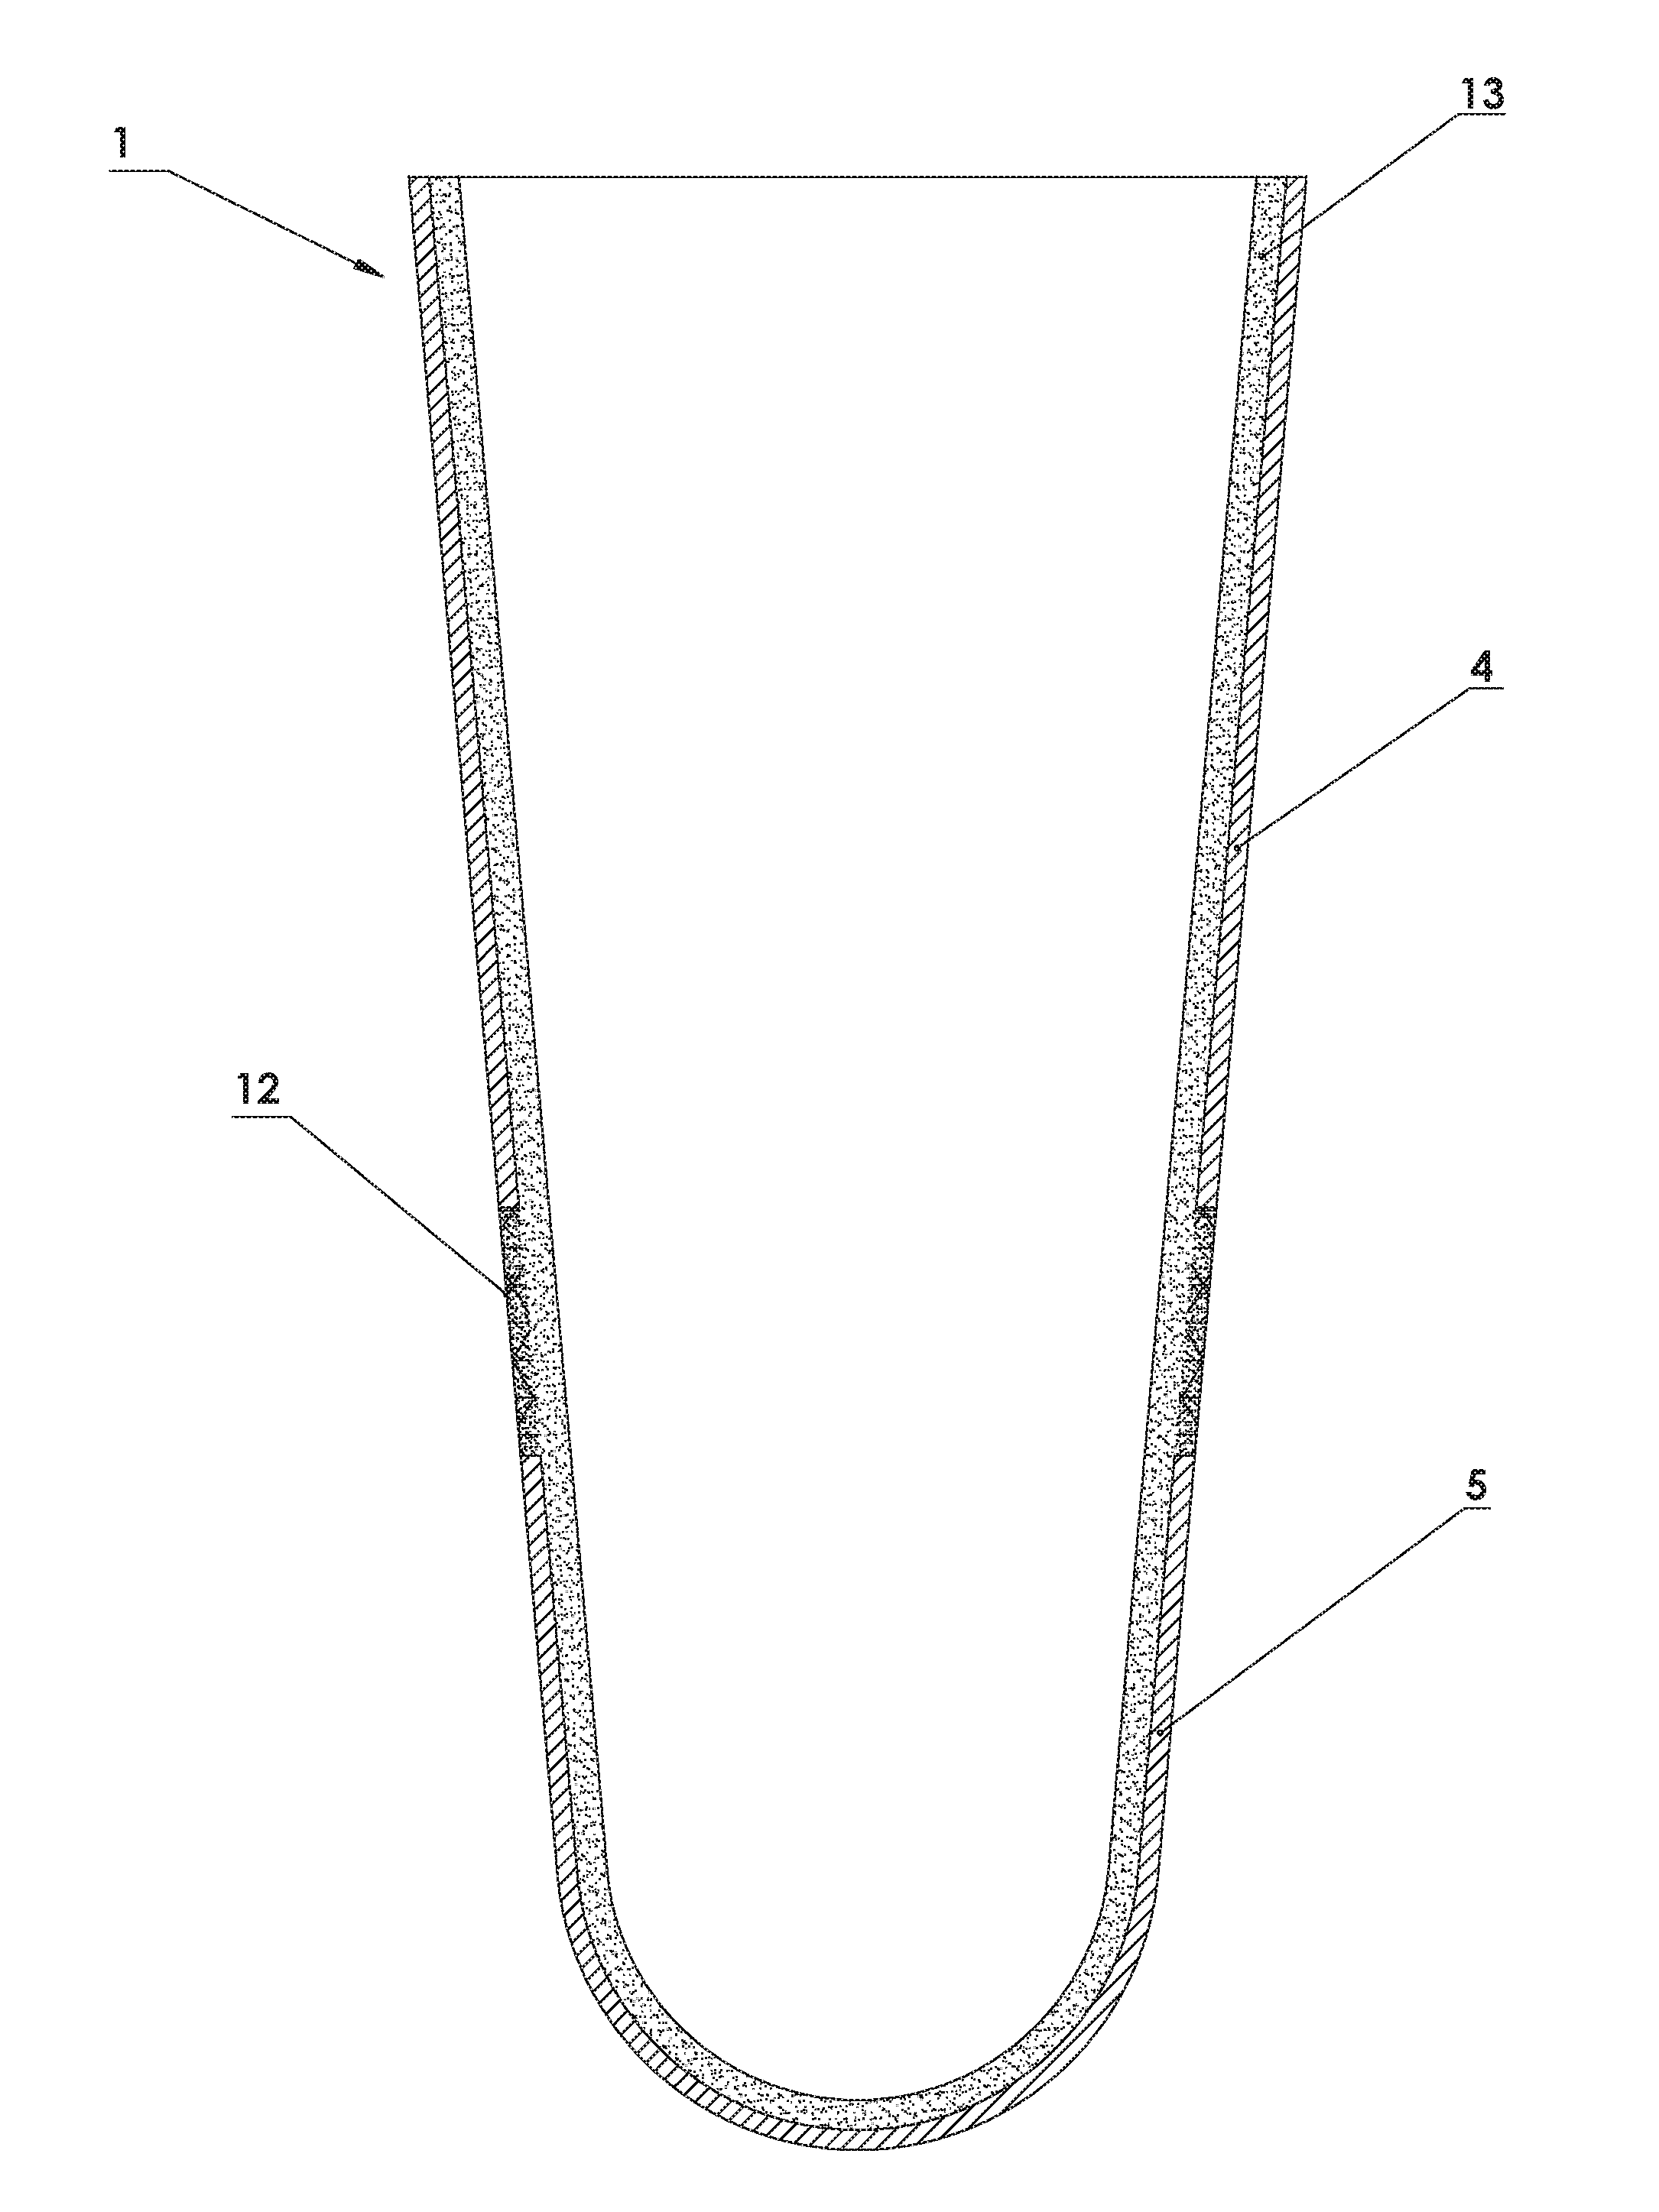 Method and apparatus of an integrated raised gel sealing liner